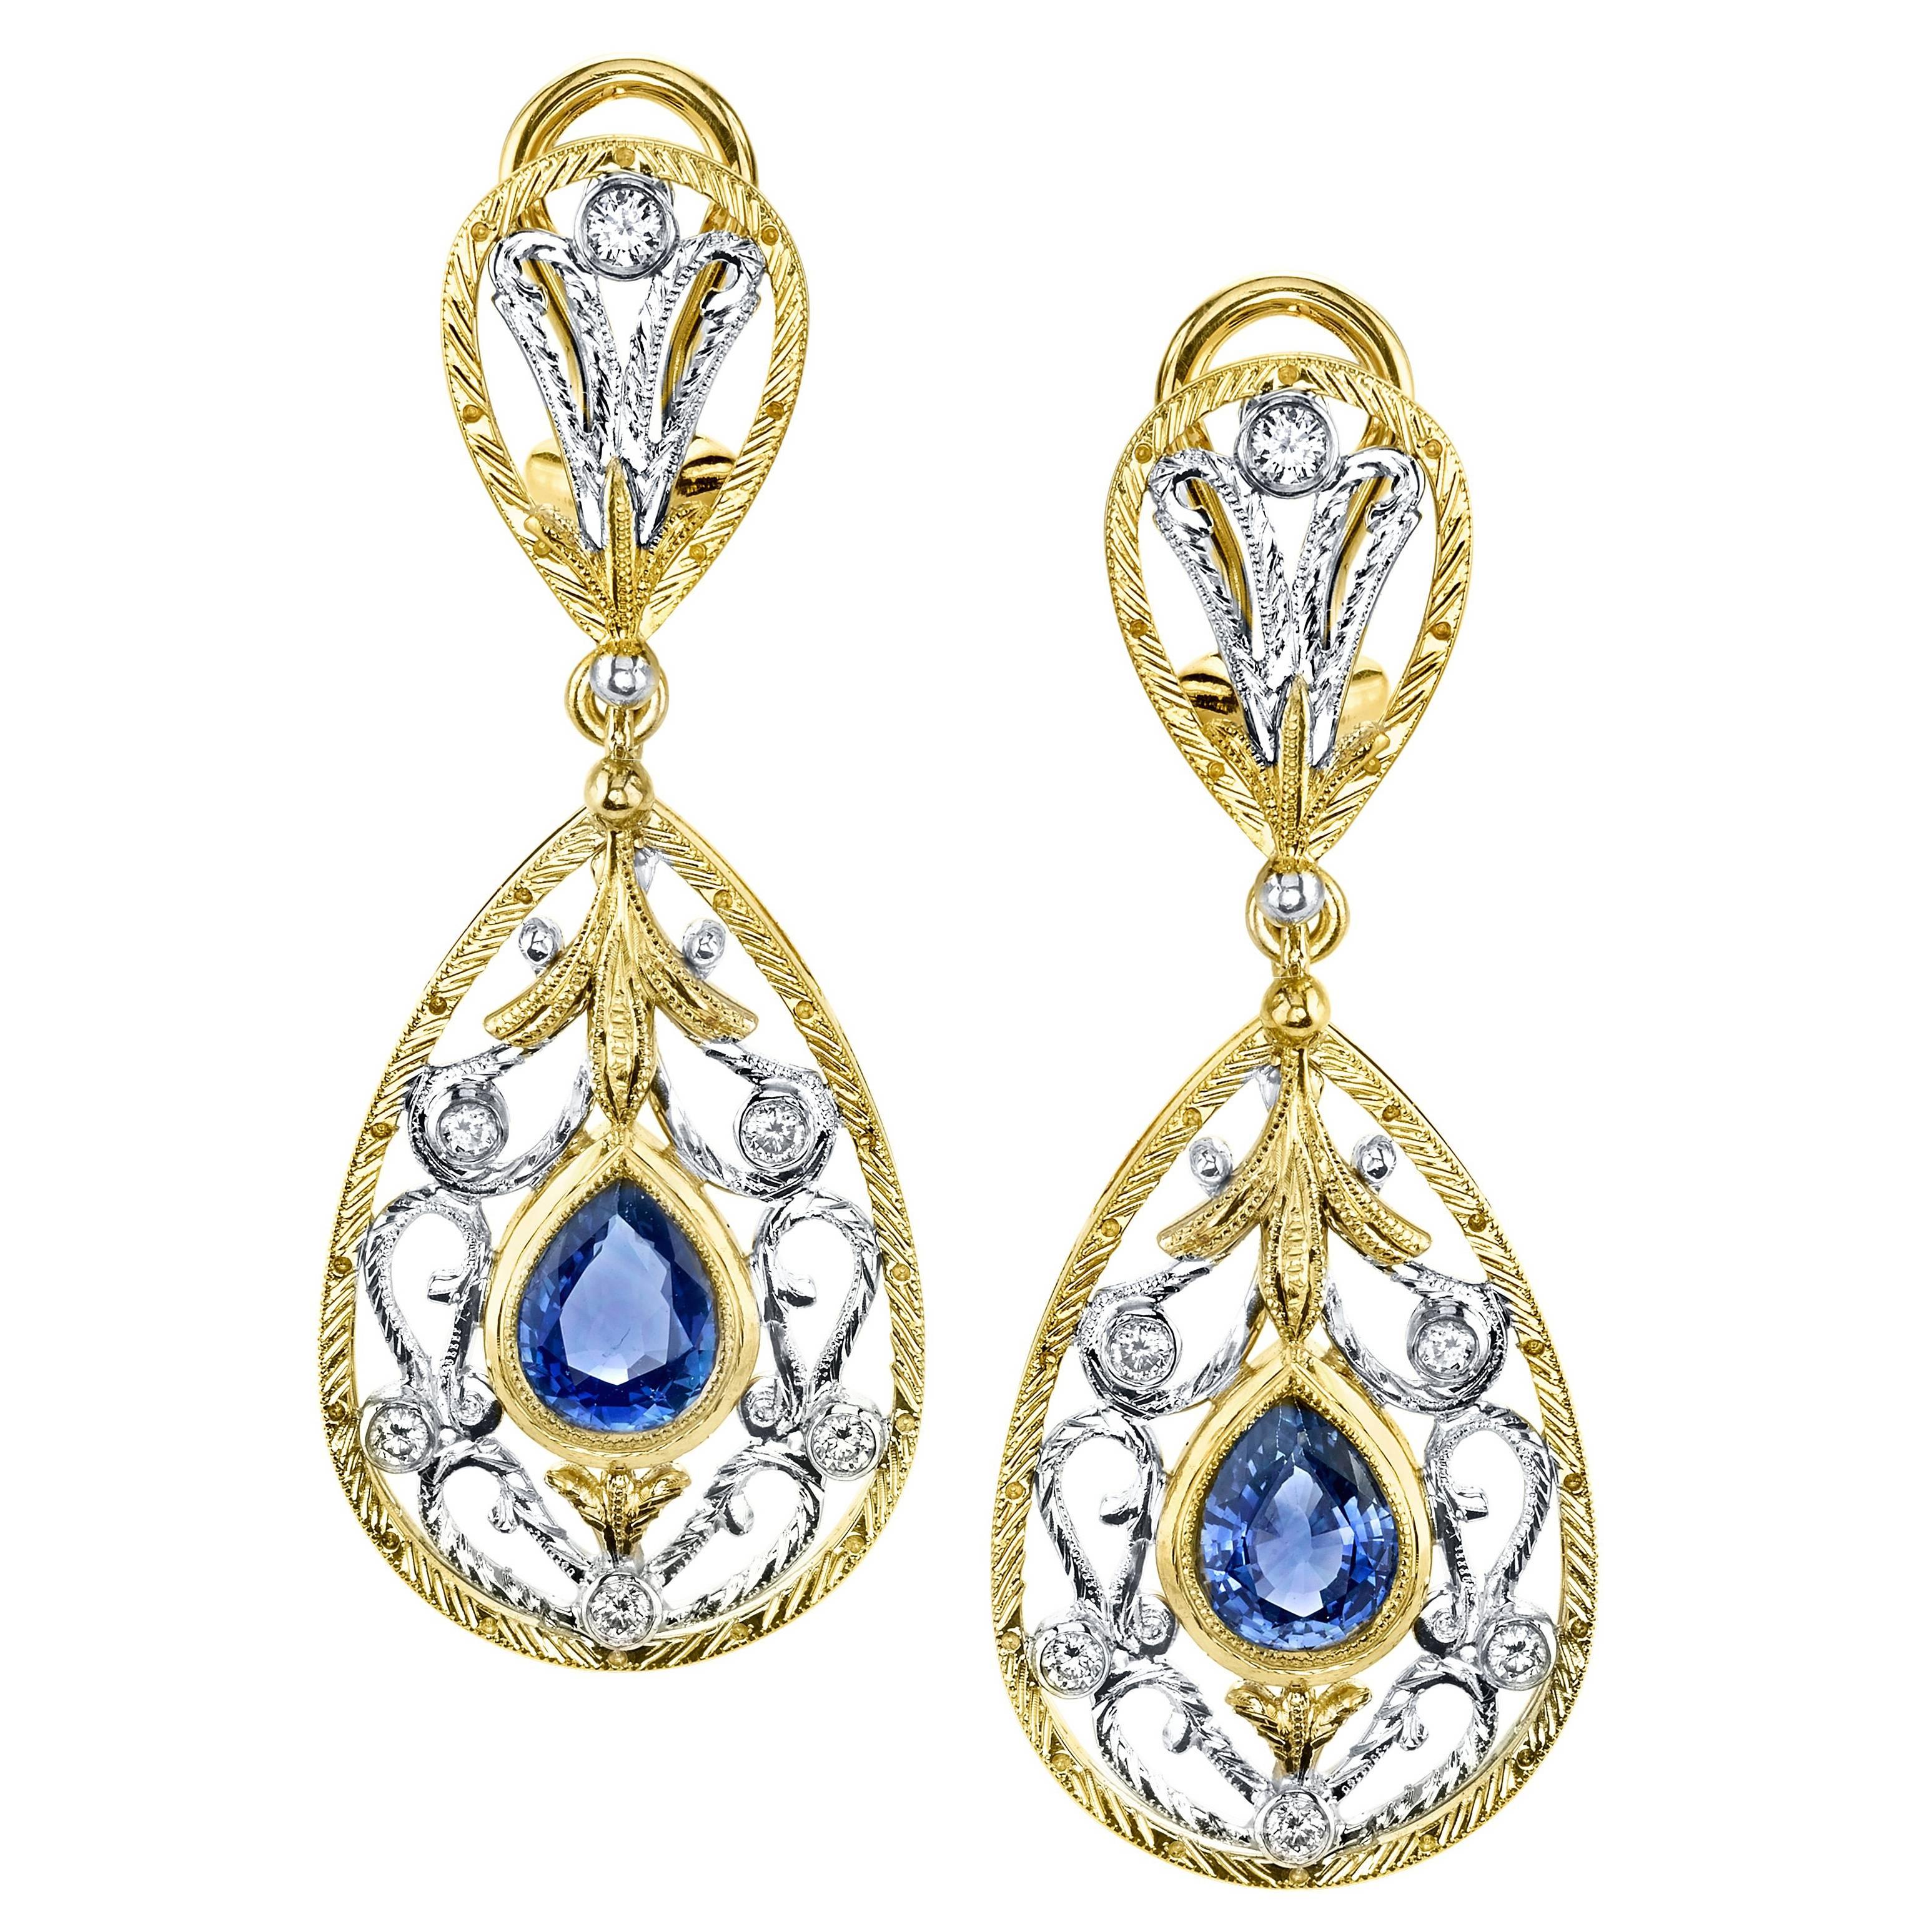 These intricately designed and handcrafted dangle earrings feature beautifully matched pear shaped royal blue sapphires set with sparkling diamonds in a stunning and elaborate design! The sapphires are bezel set in 18k yellow gold, framed with